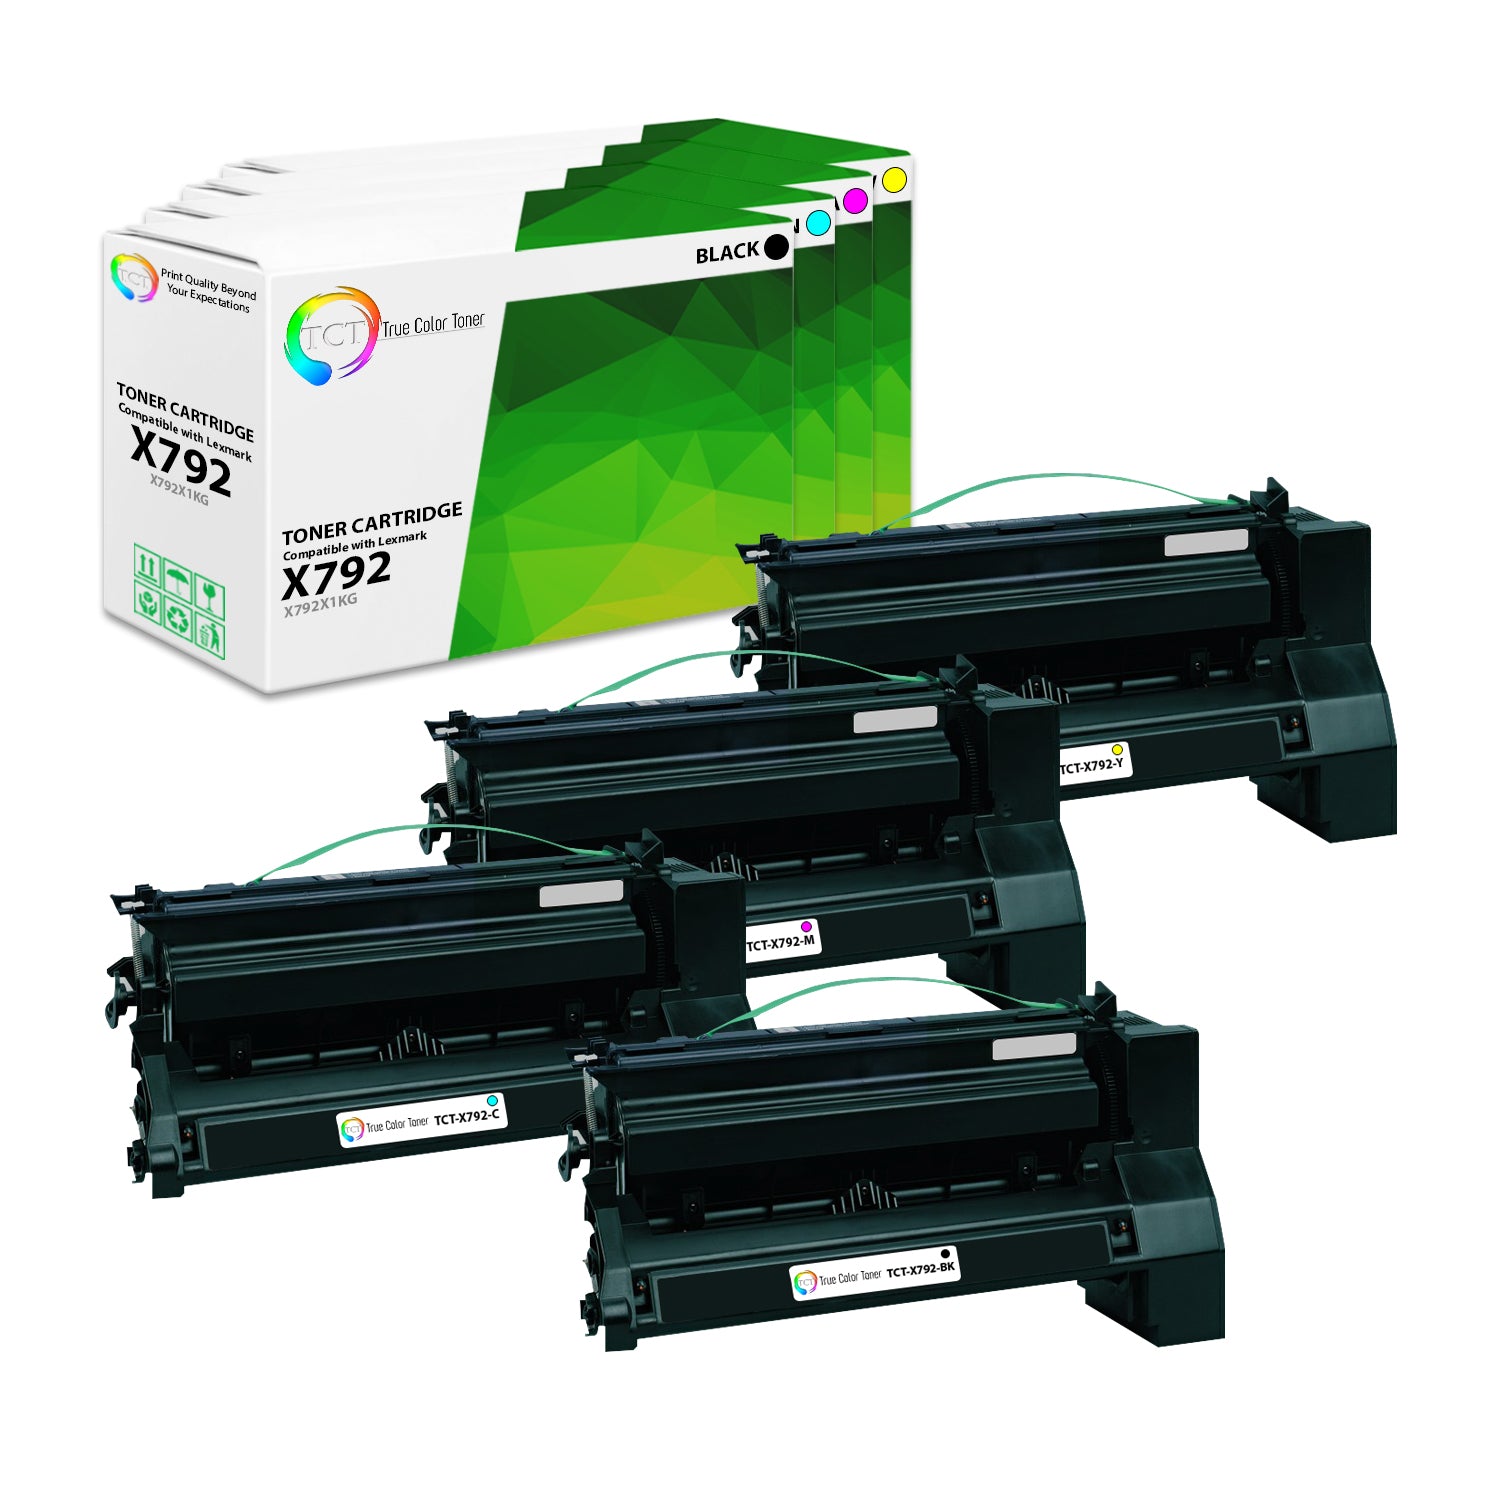 TCT Compatible Extra HY Toner Cartridge Replacement for the Lexmark X792 Series - 4 Pack (BCMY)